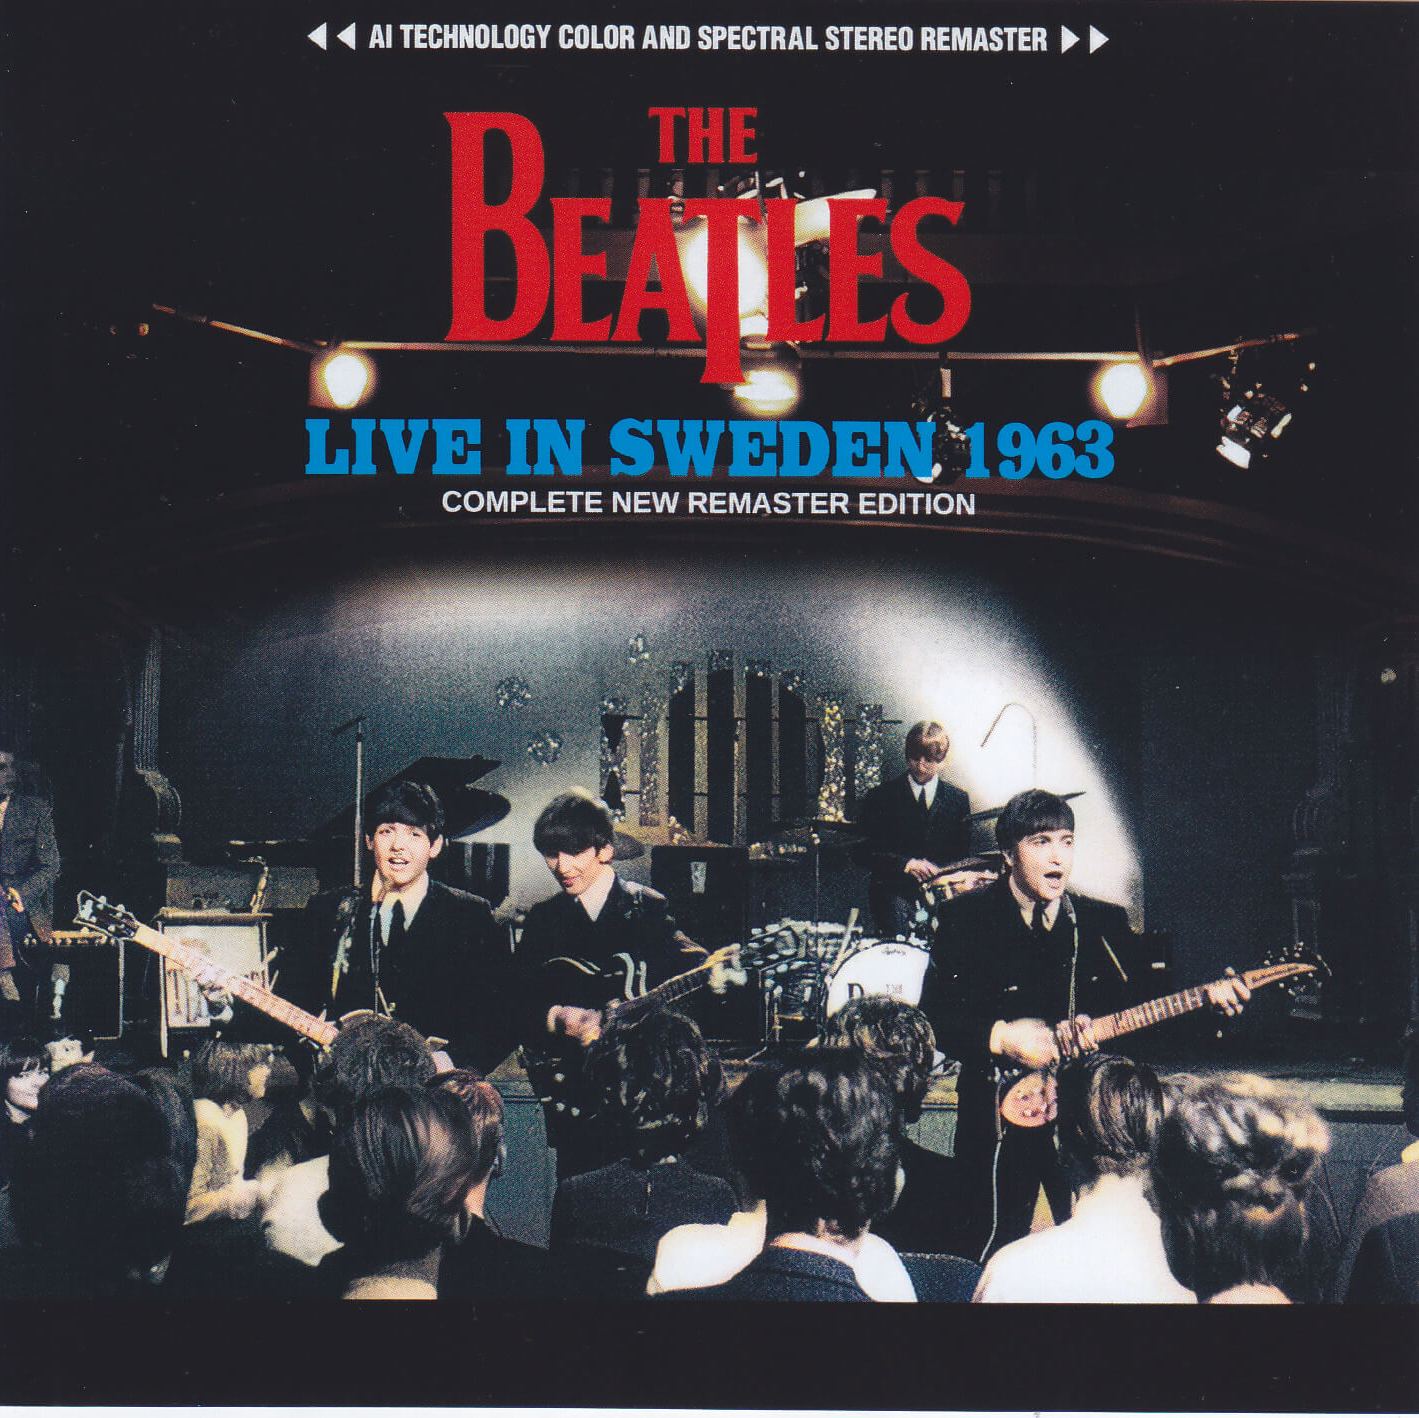 The Beatles - Live In Sweden 1963 Complete New Remaster Edition.jpg